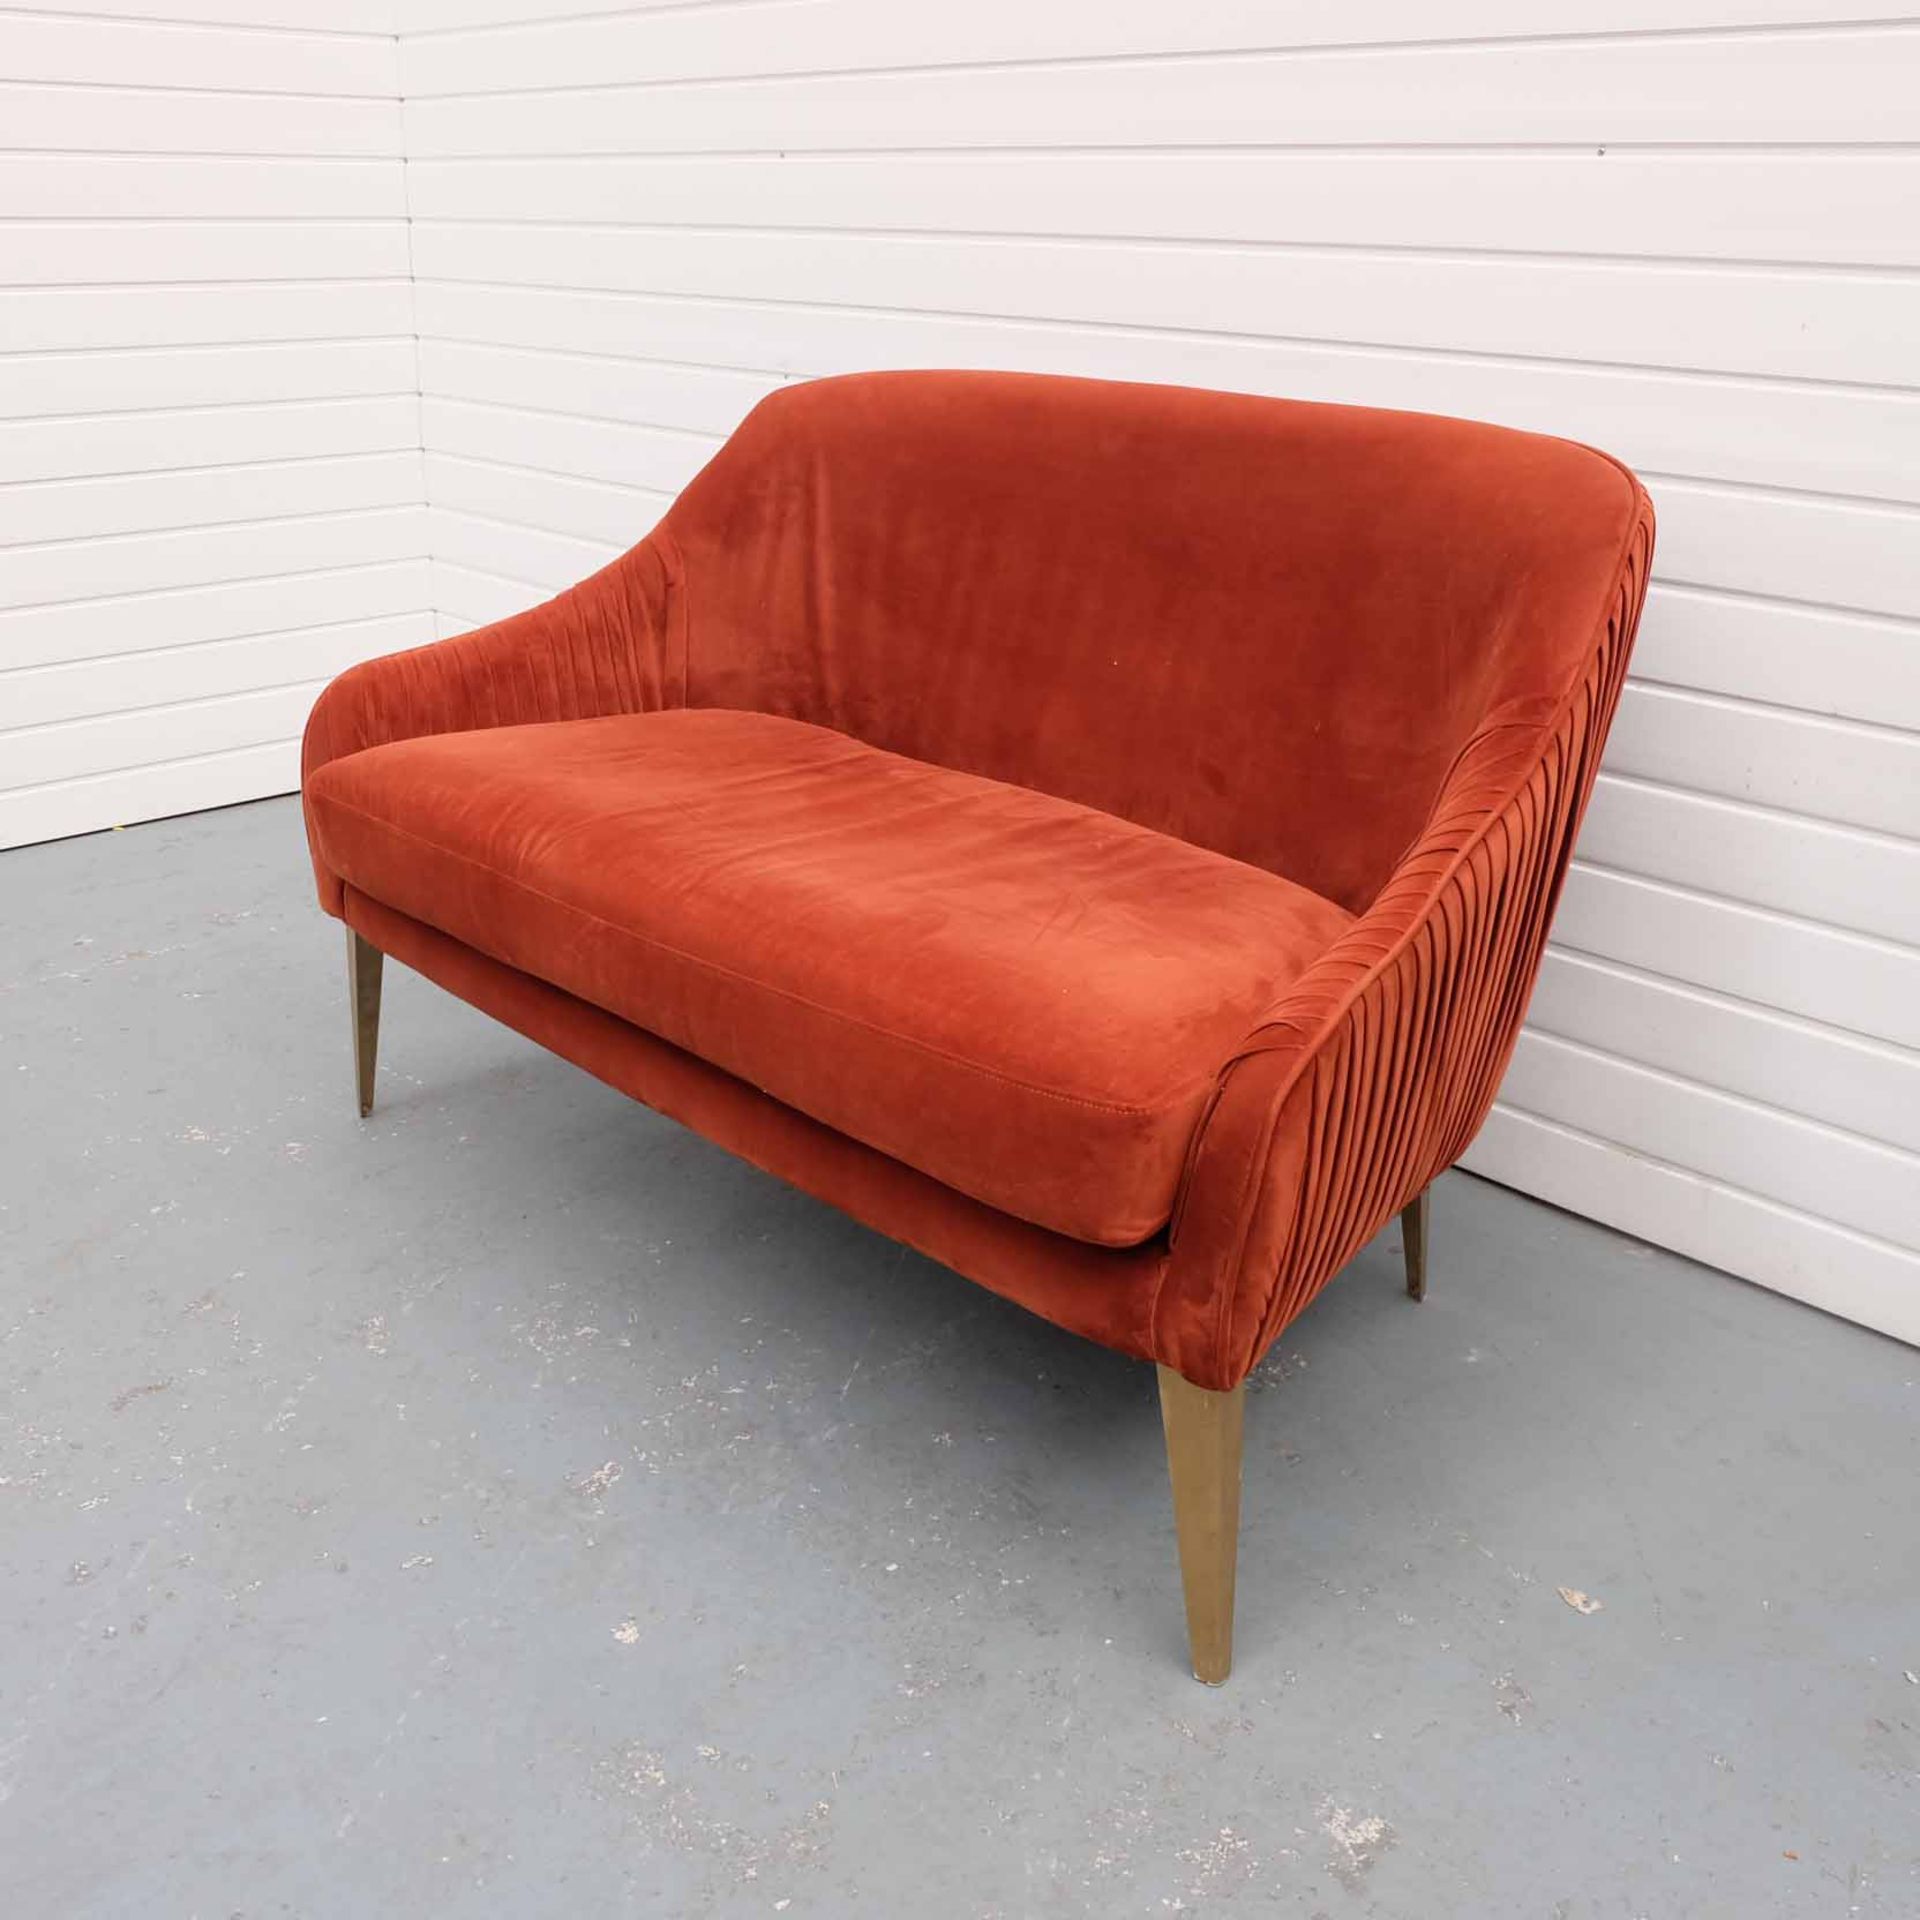 Coach House 2 Seater Love Seat. - Image 3 of 4